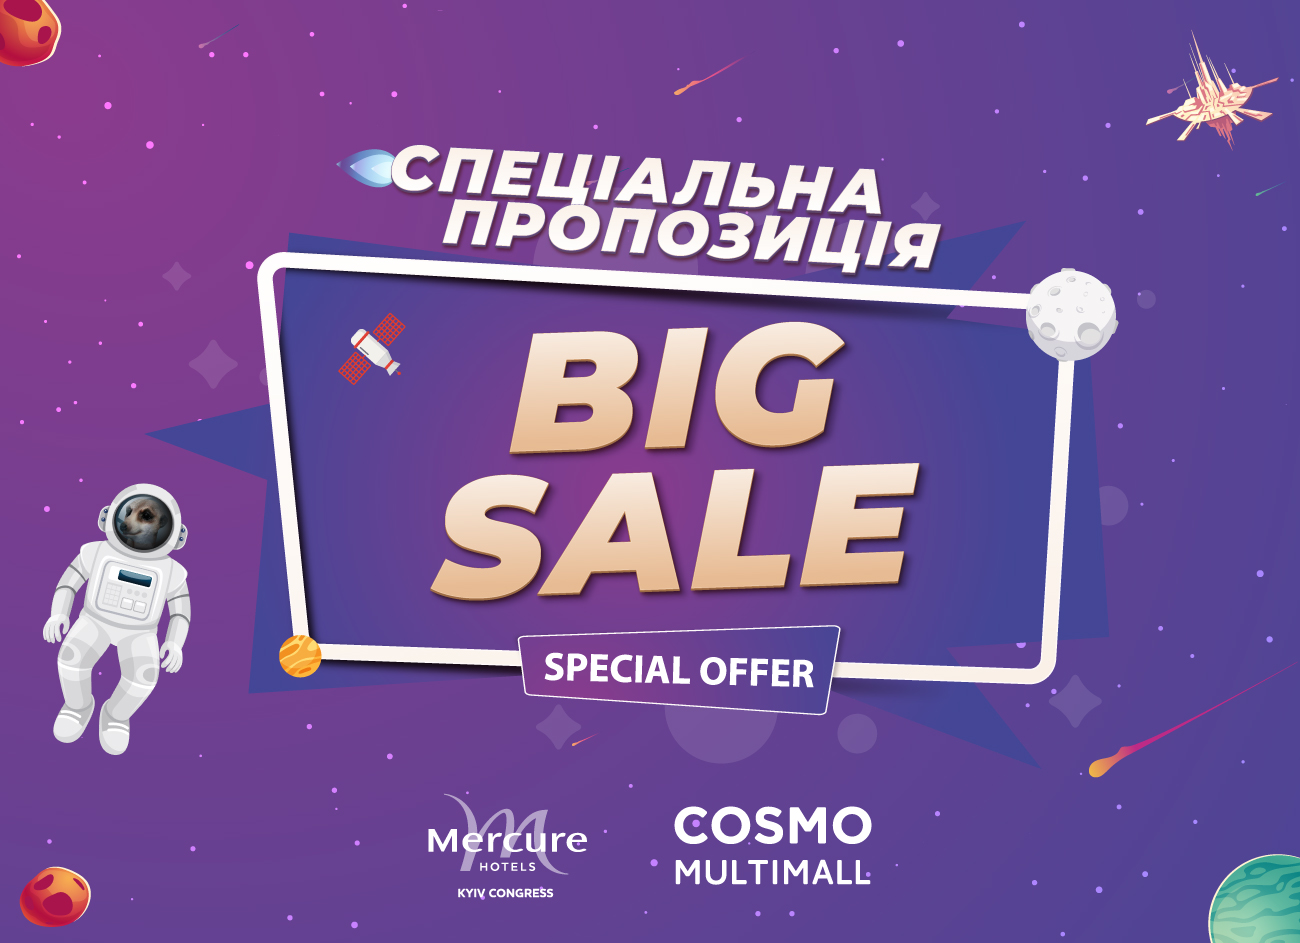 Smart shopping with Mercure: Big sale at Cosmo Multimall!